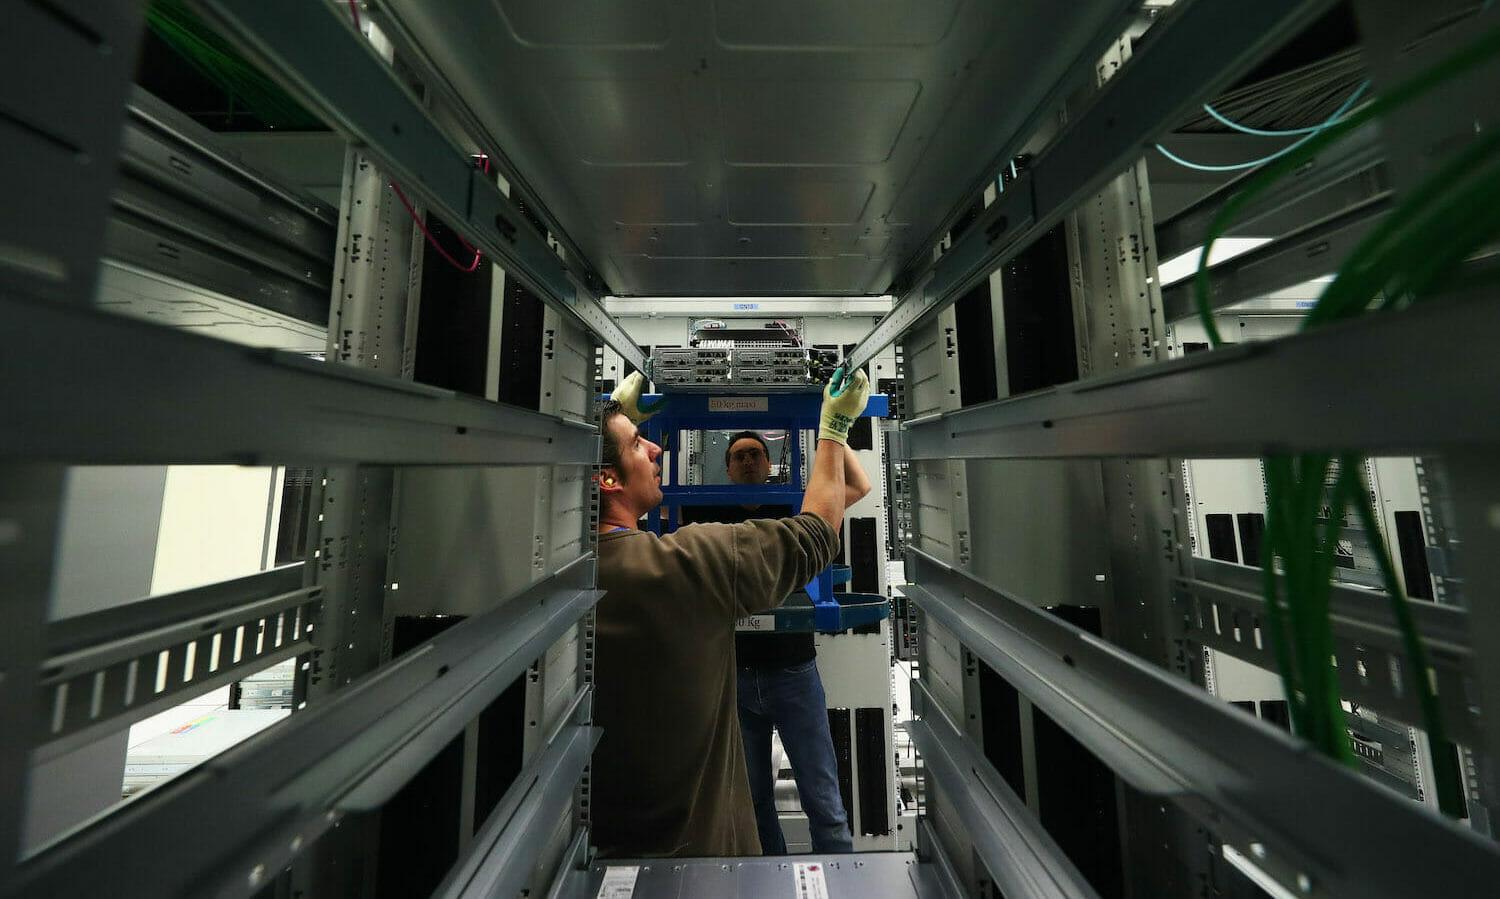 Staff work in a data center and server farm  in Switzerland. (Dean Mouhtaropoulos/Getty Images)